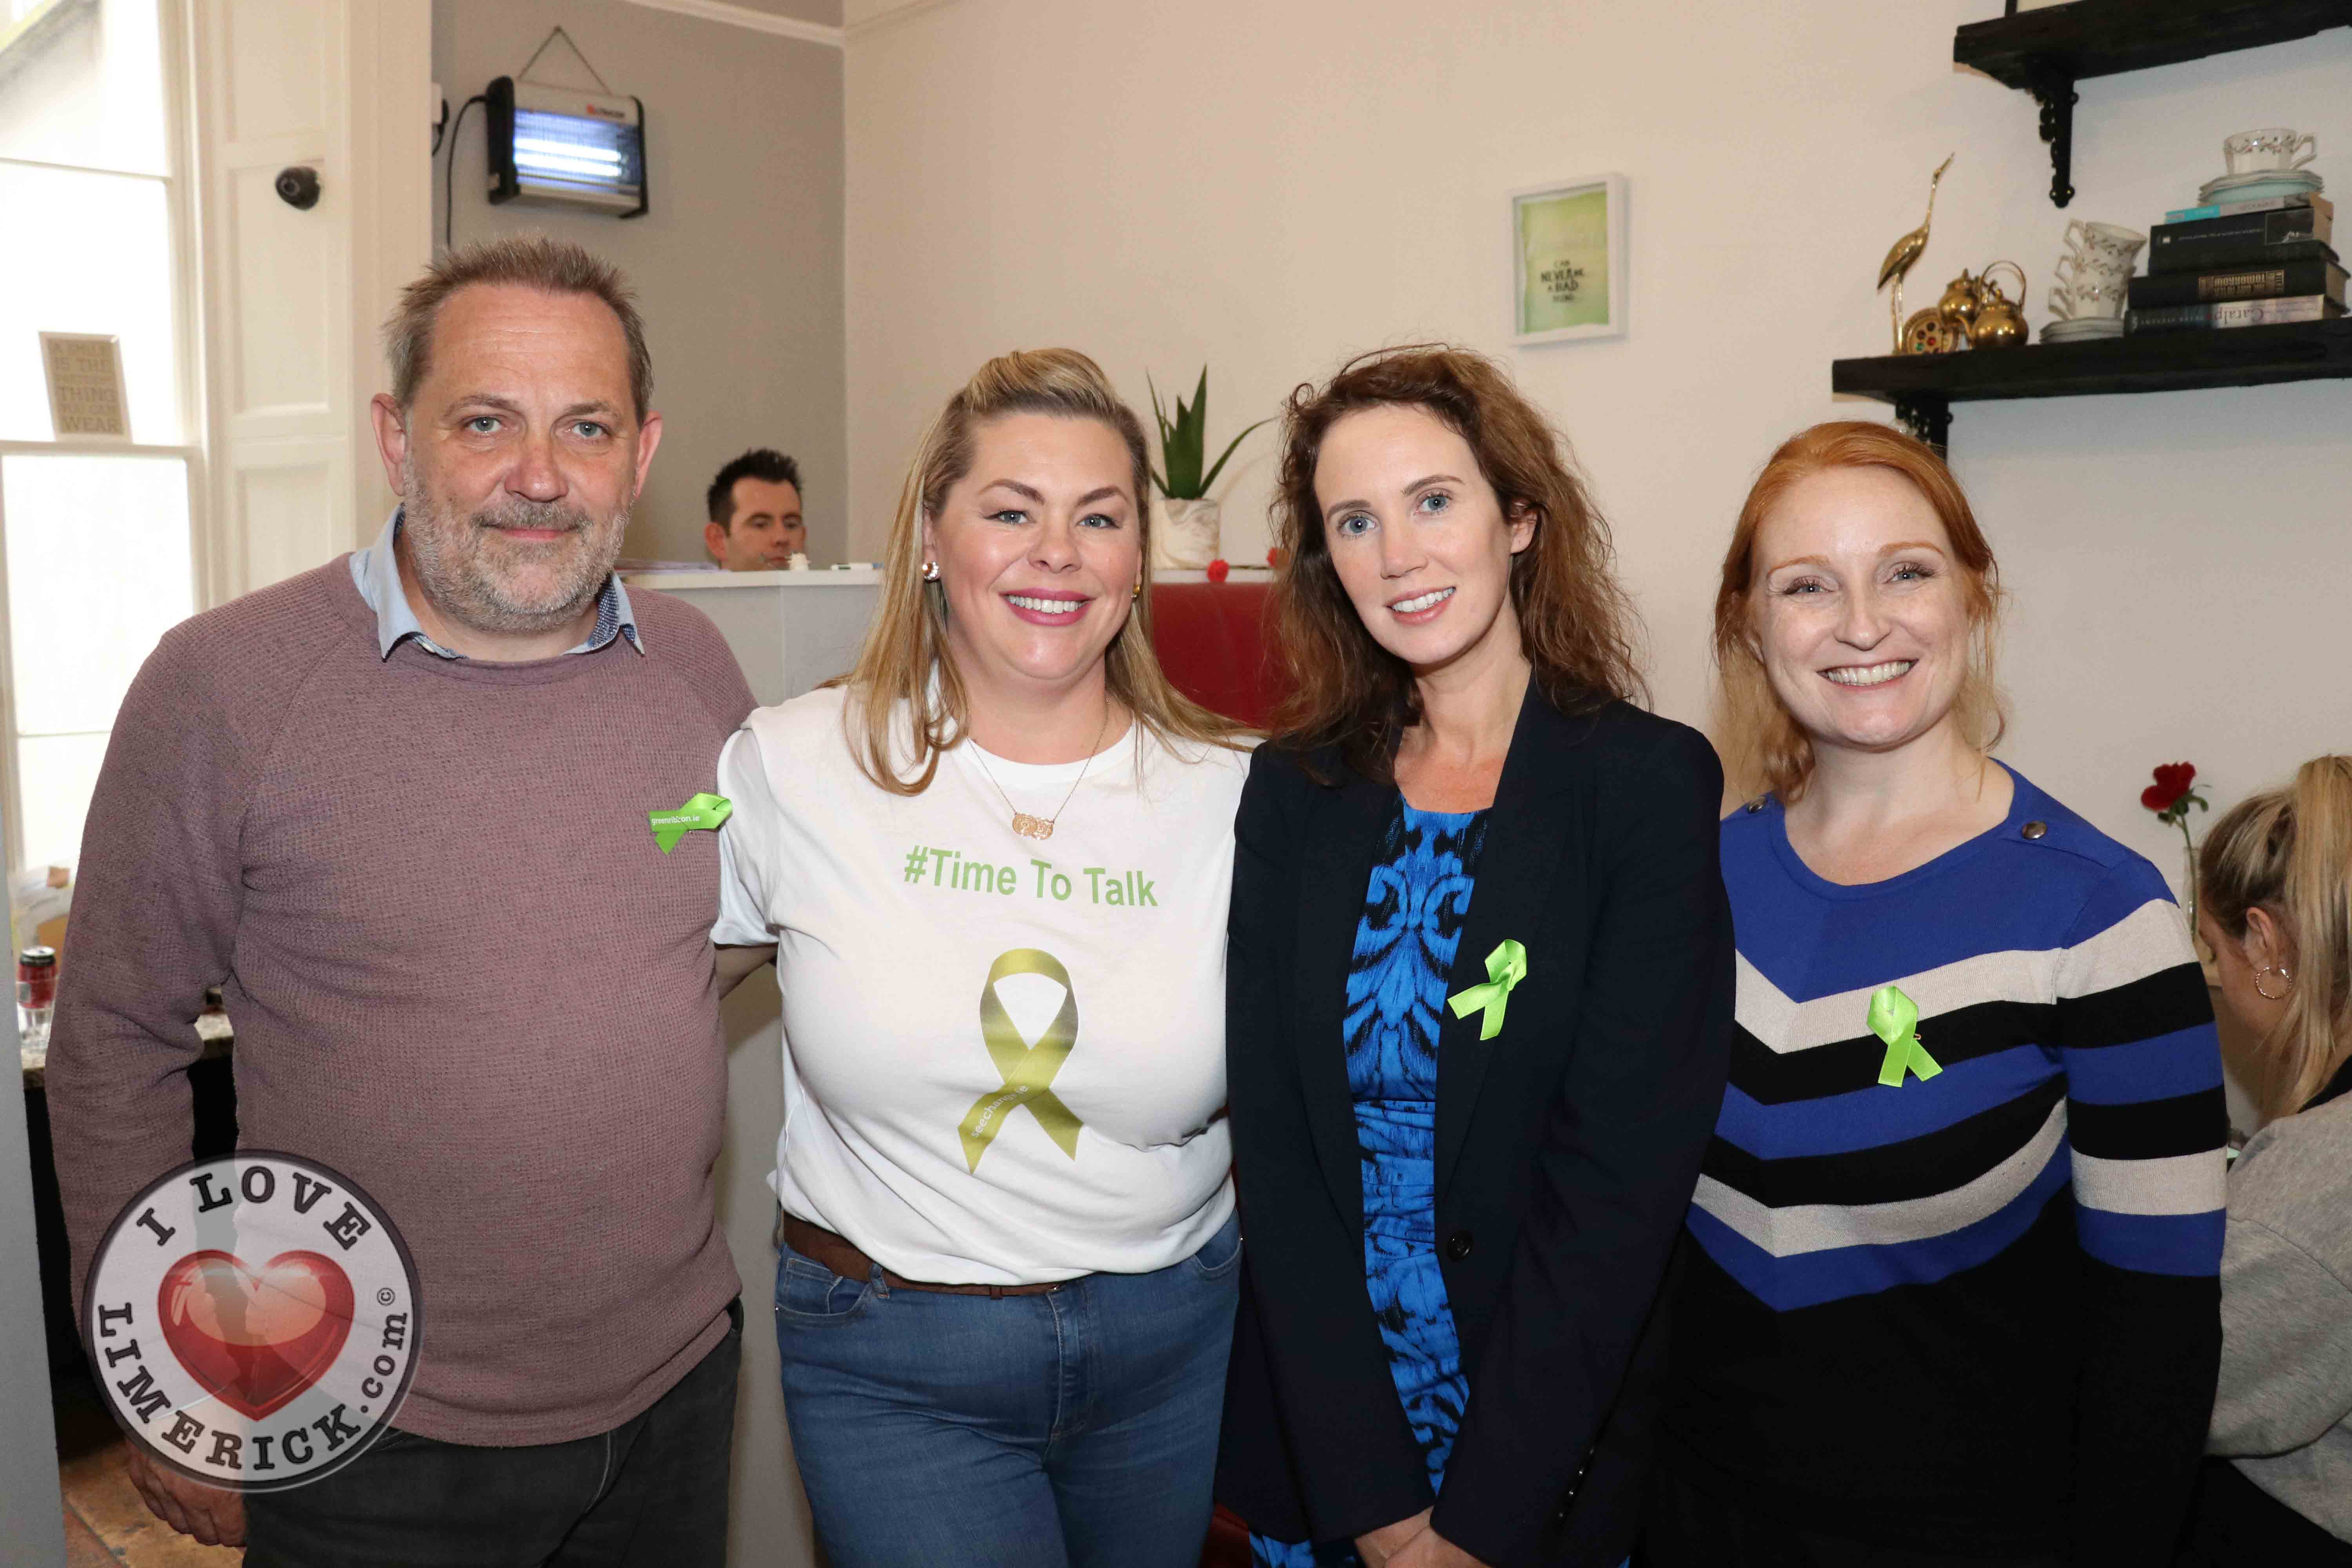 Pictured at the Ruby Sundays cafe for the EmployAbility Limerick's 'Time to Talk' day are life coach Patrick Merice, Ursula Mackenzie, EmployAbility Limerick, Mary McNamee, Limerick Chamber, and Sinead Clinton, Metis Ireland. Picture: Conor Owens/ilovelimerick.